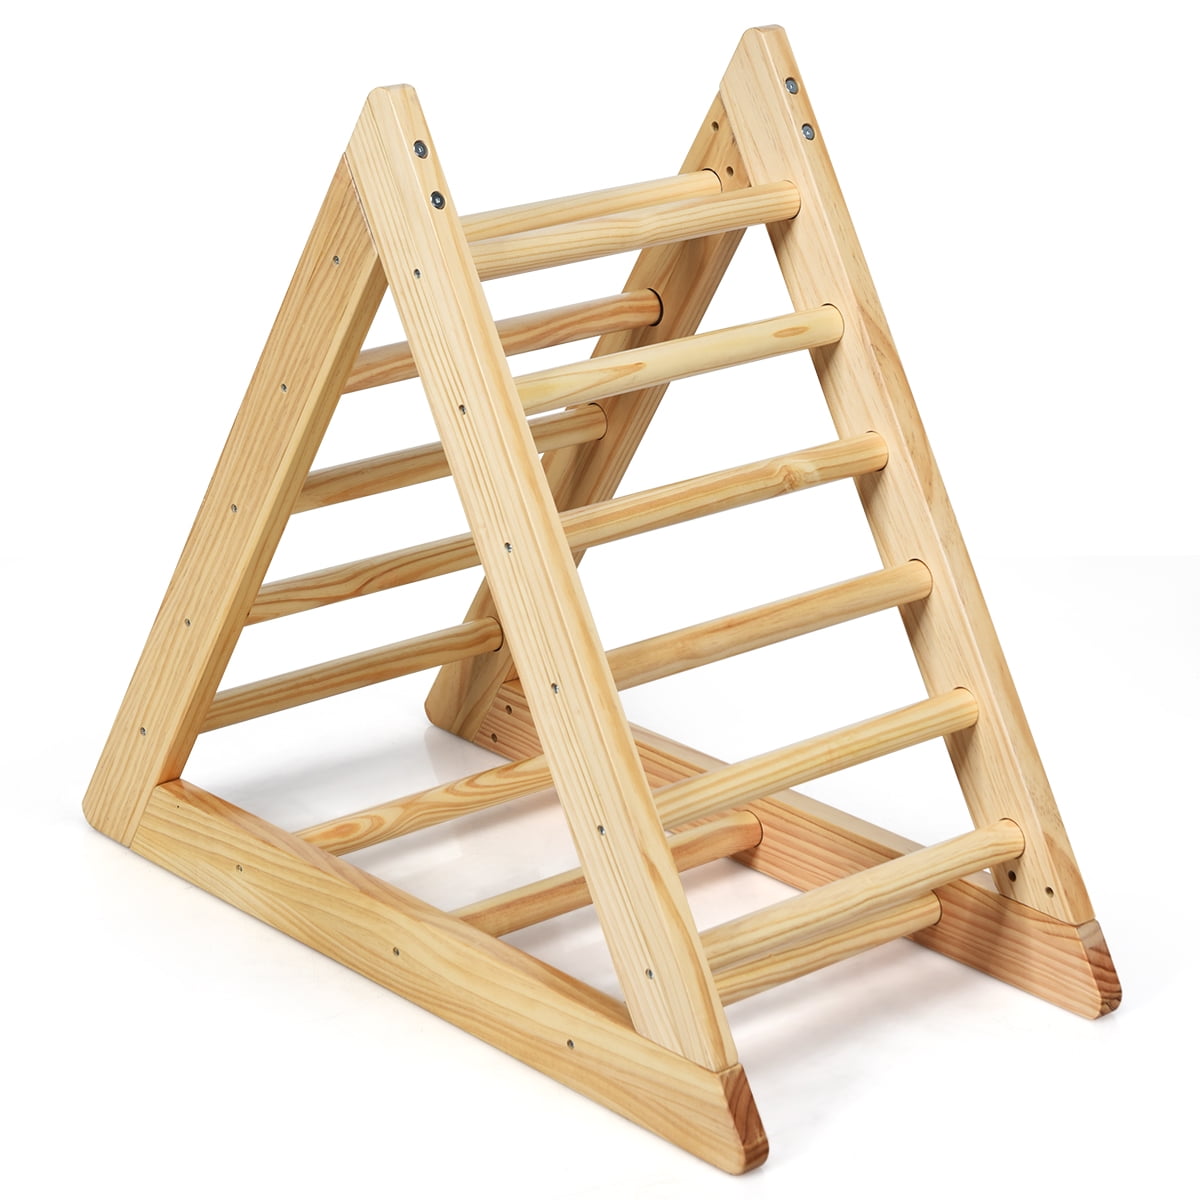 Stable Wooden Triangle Nature Old Mayjooy Climbing Triangle Ladder Triangle Climber w/3 Climbing Ladders for Boys & Girls Indoor Playful Climbers for Children Toddlers Kids Over 3 yr 